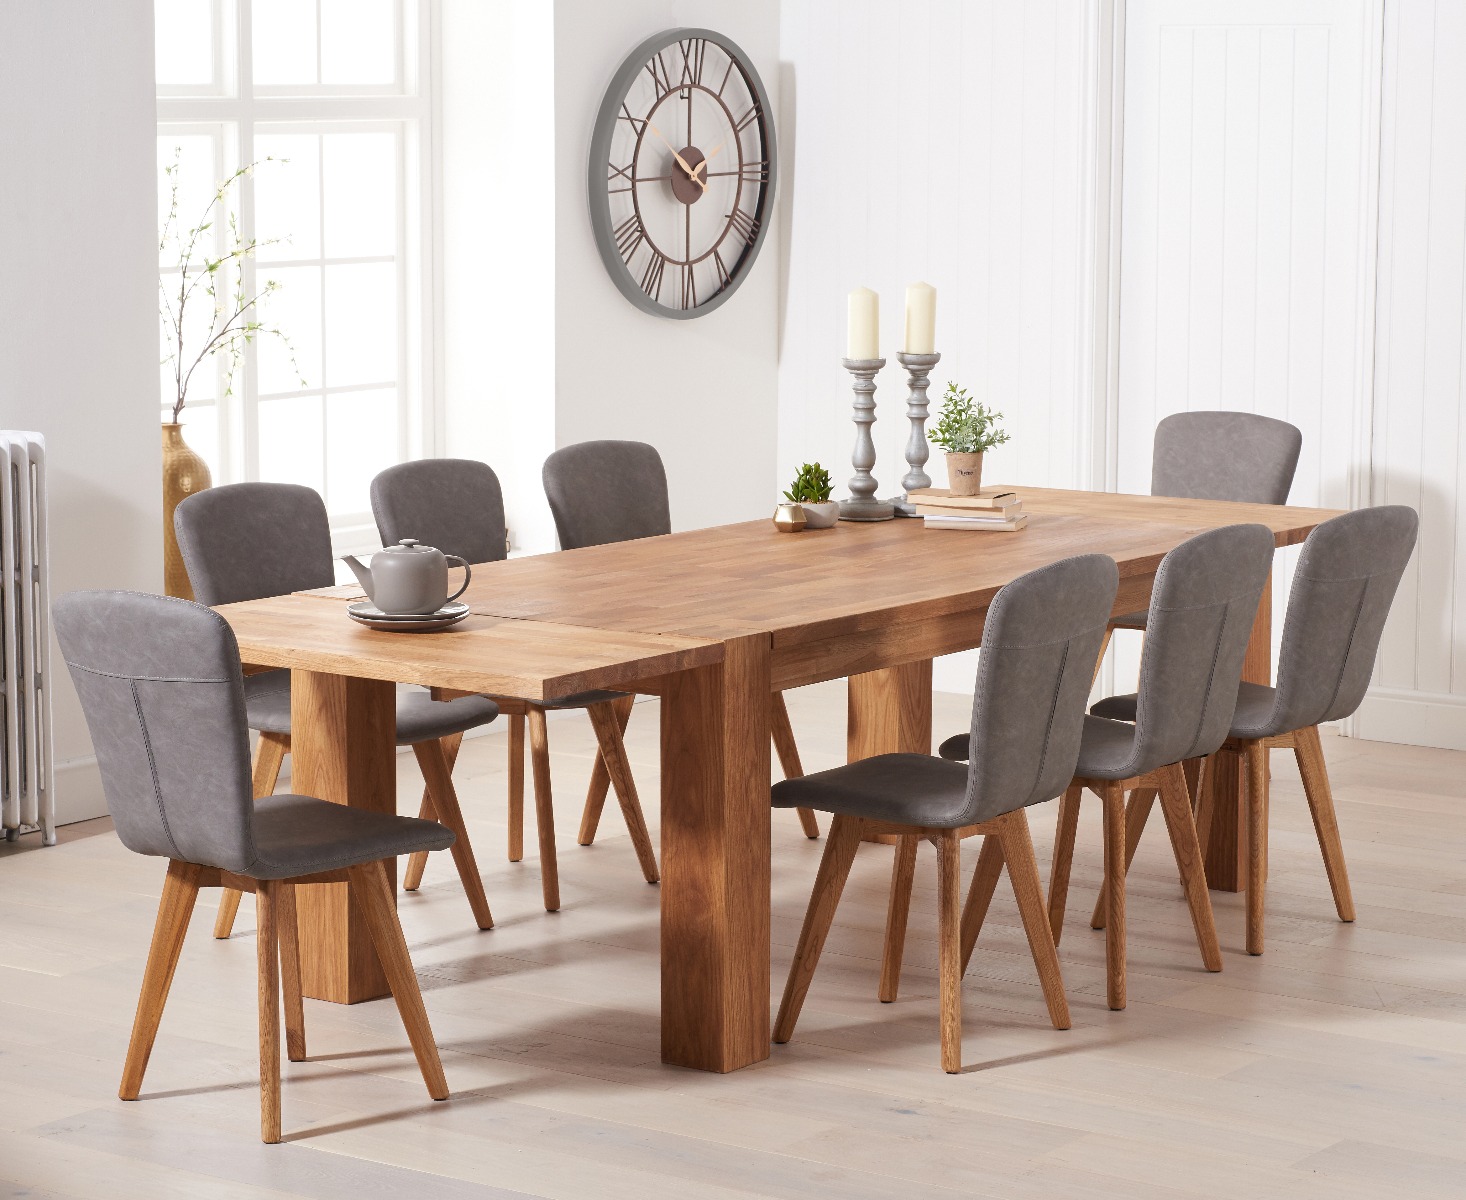 Extending Sheringham 200cm Solid Oak Table With 8 Grey Ruben Faux Leather Chairs